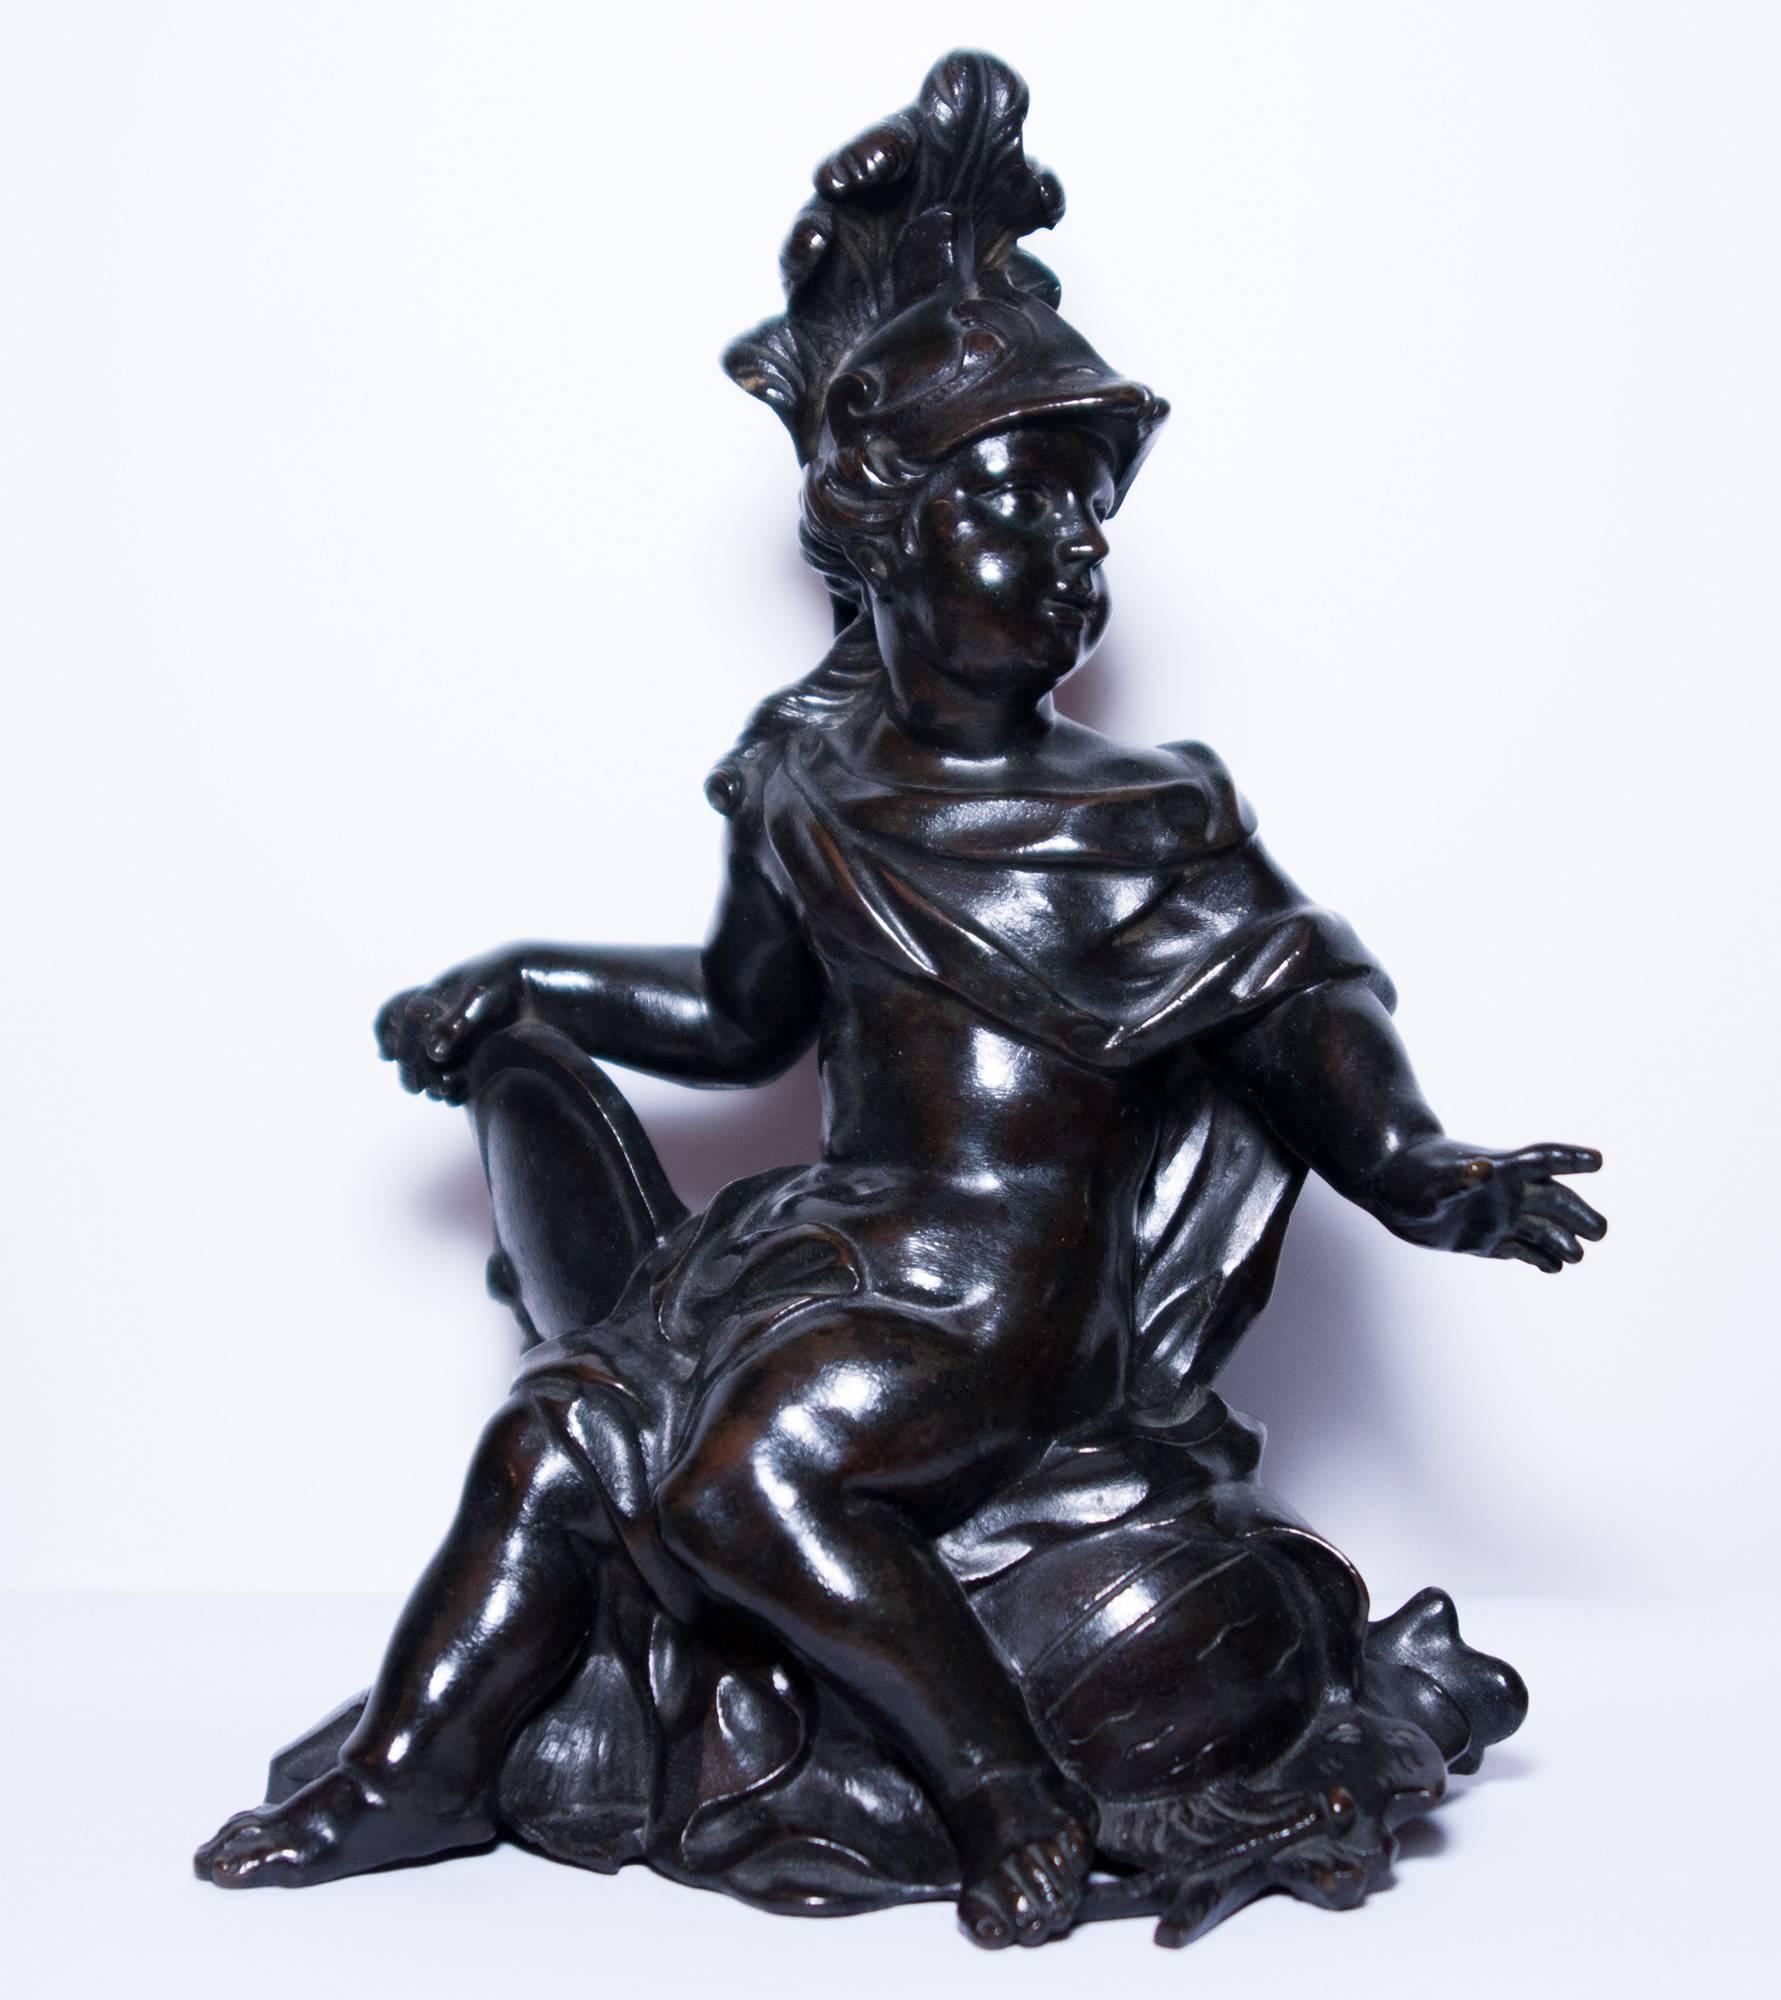 Pair of allegorical bronze figures, French Regency period - Sculpture by Unknown